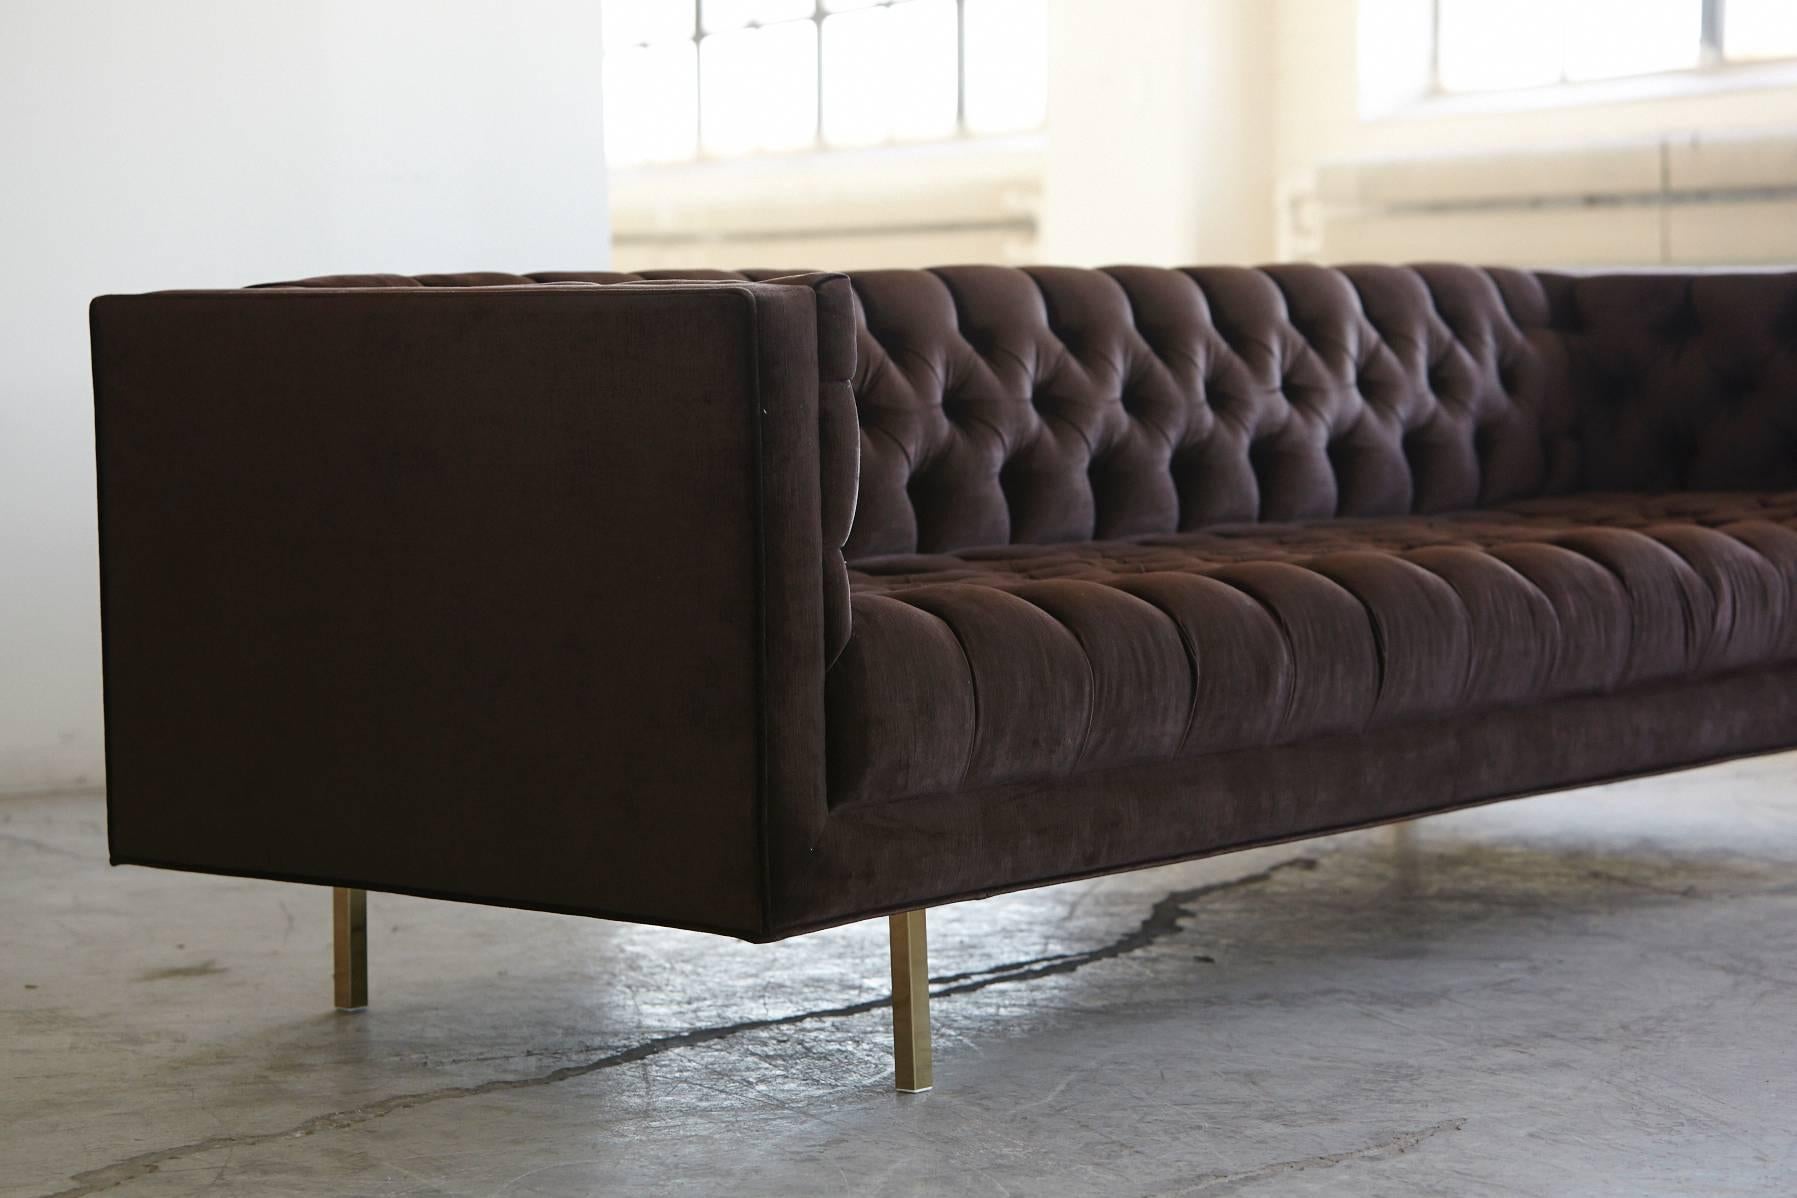 American Modern Deeply Button Tufted Velvet Tuxedo Sofa in Chocolate Brown by Las Venus